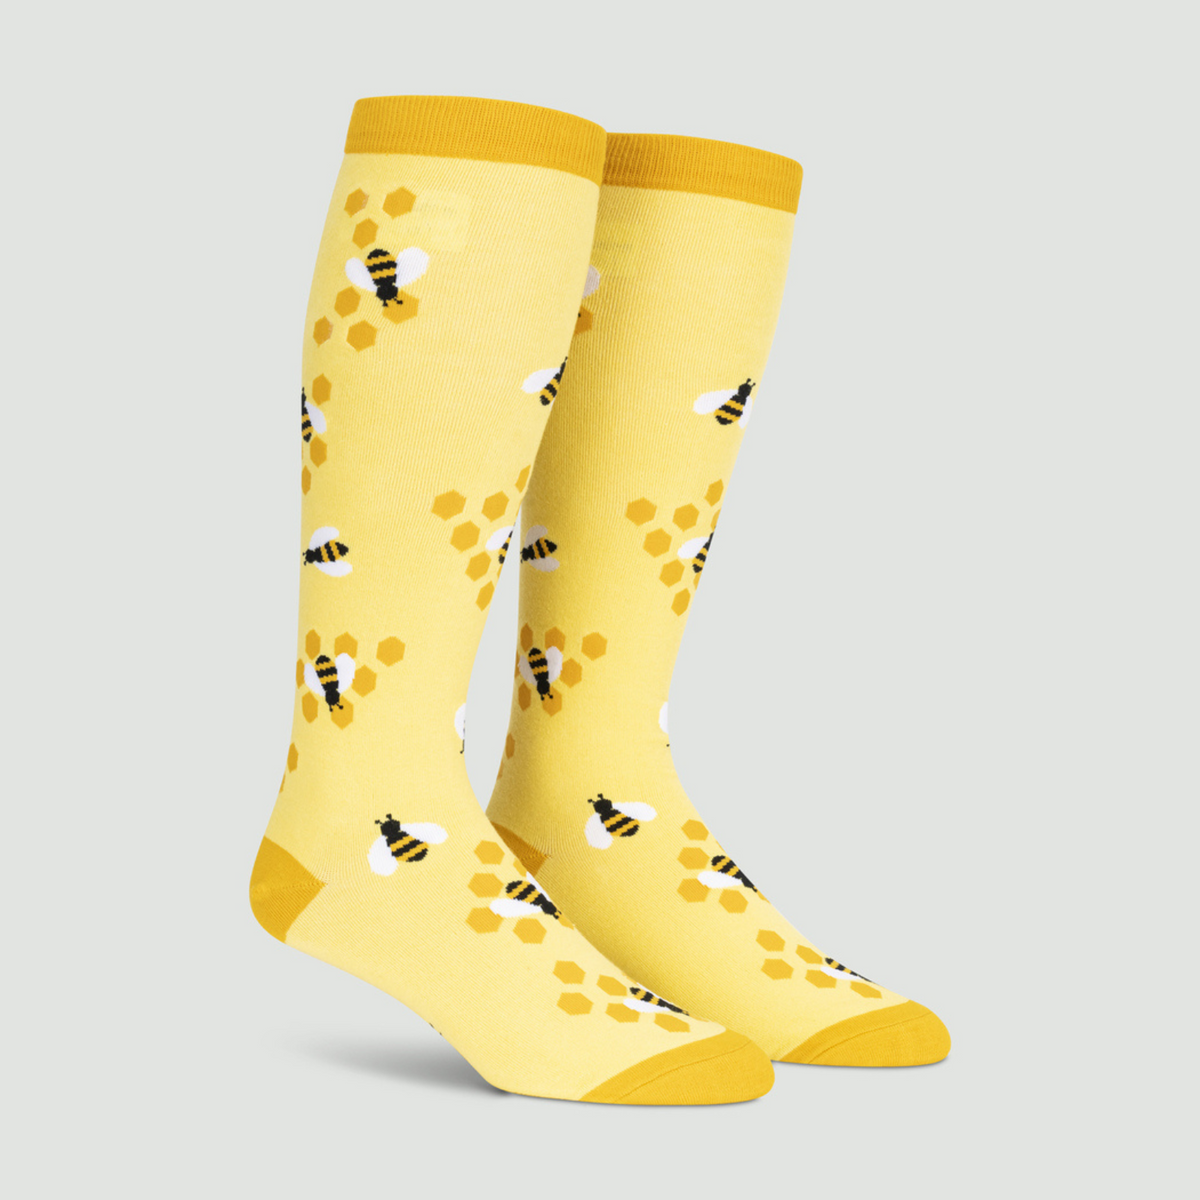 Sock It To Me extra-stretchy yellow knee high sock Bees Knees featuring honeycomb and bees all over on display